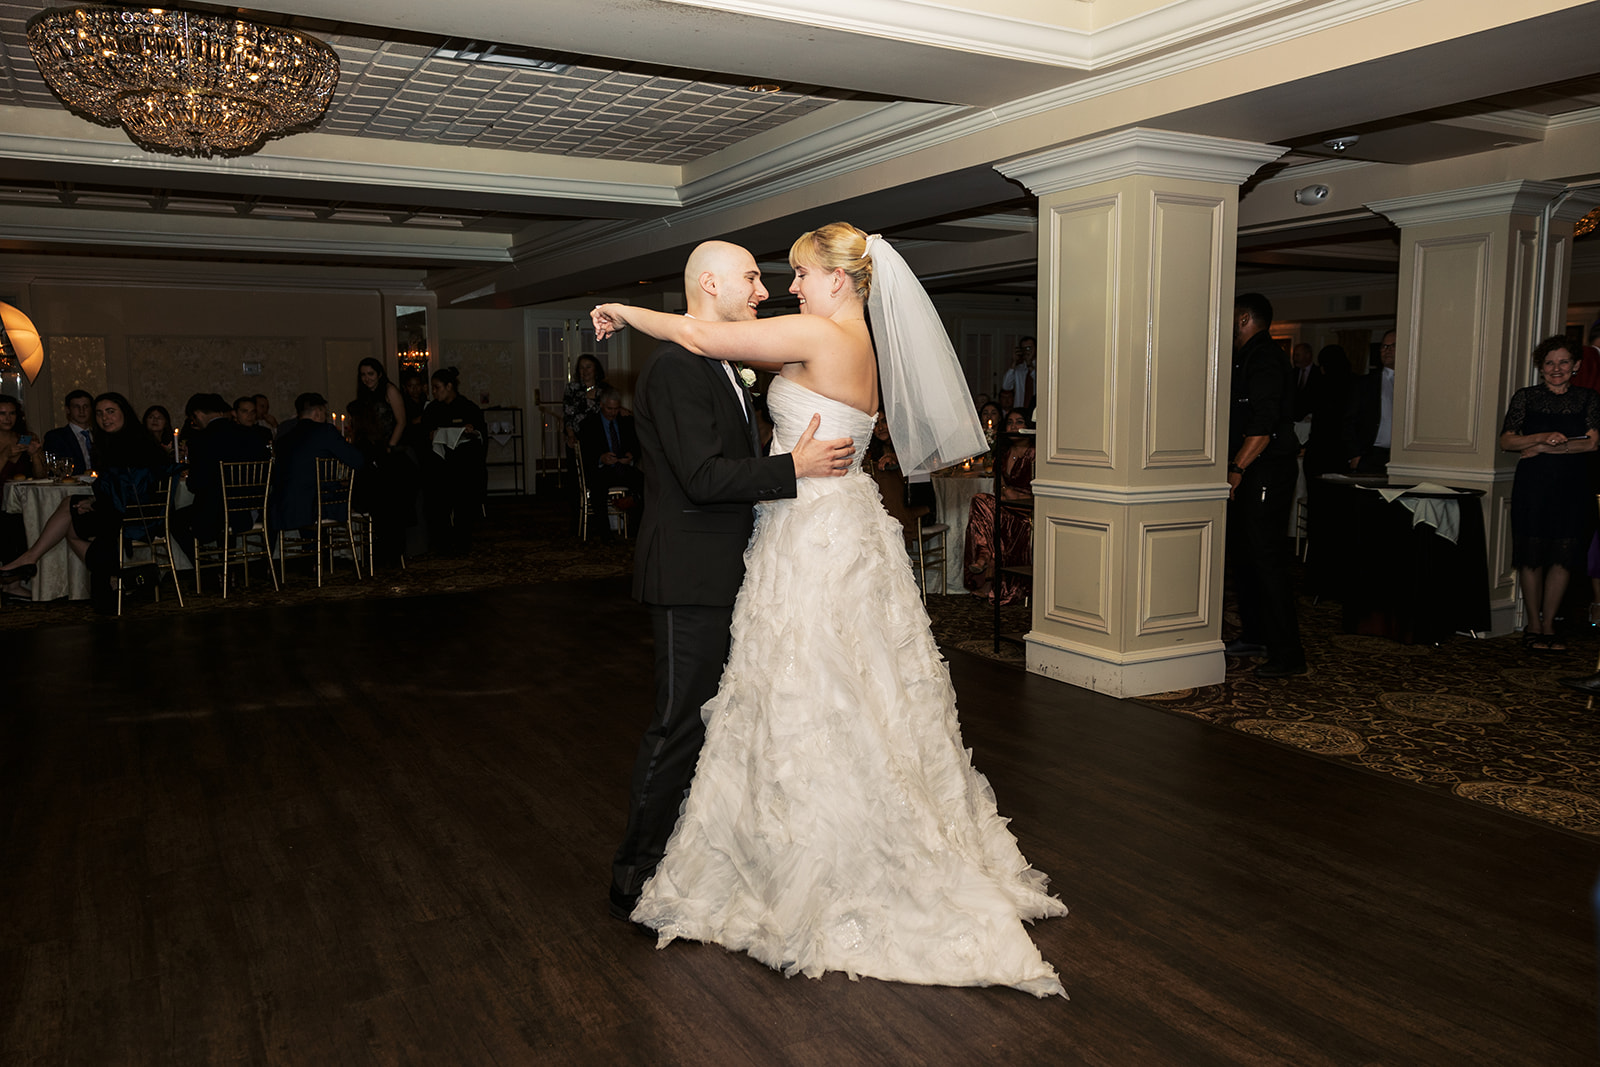 Newlyweds dance for the first time as guests look on